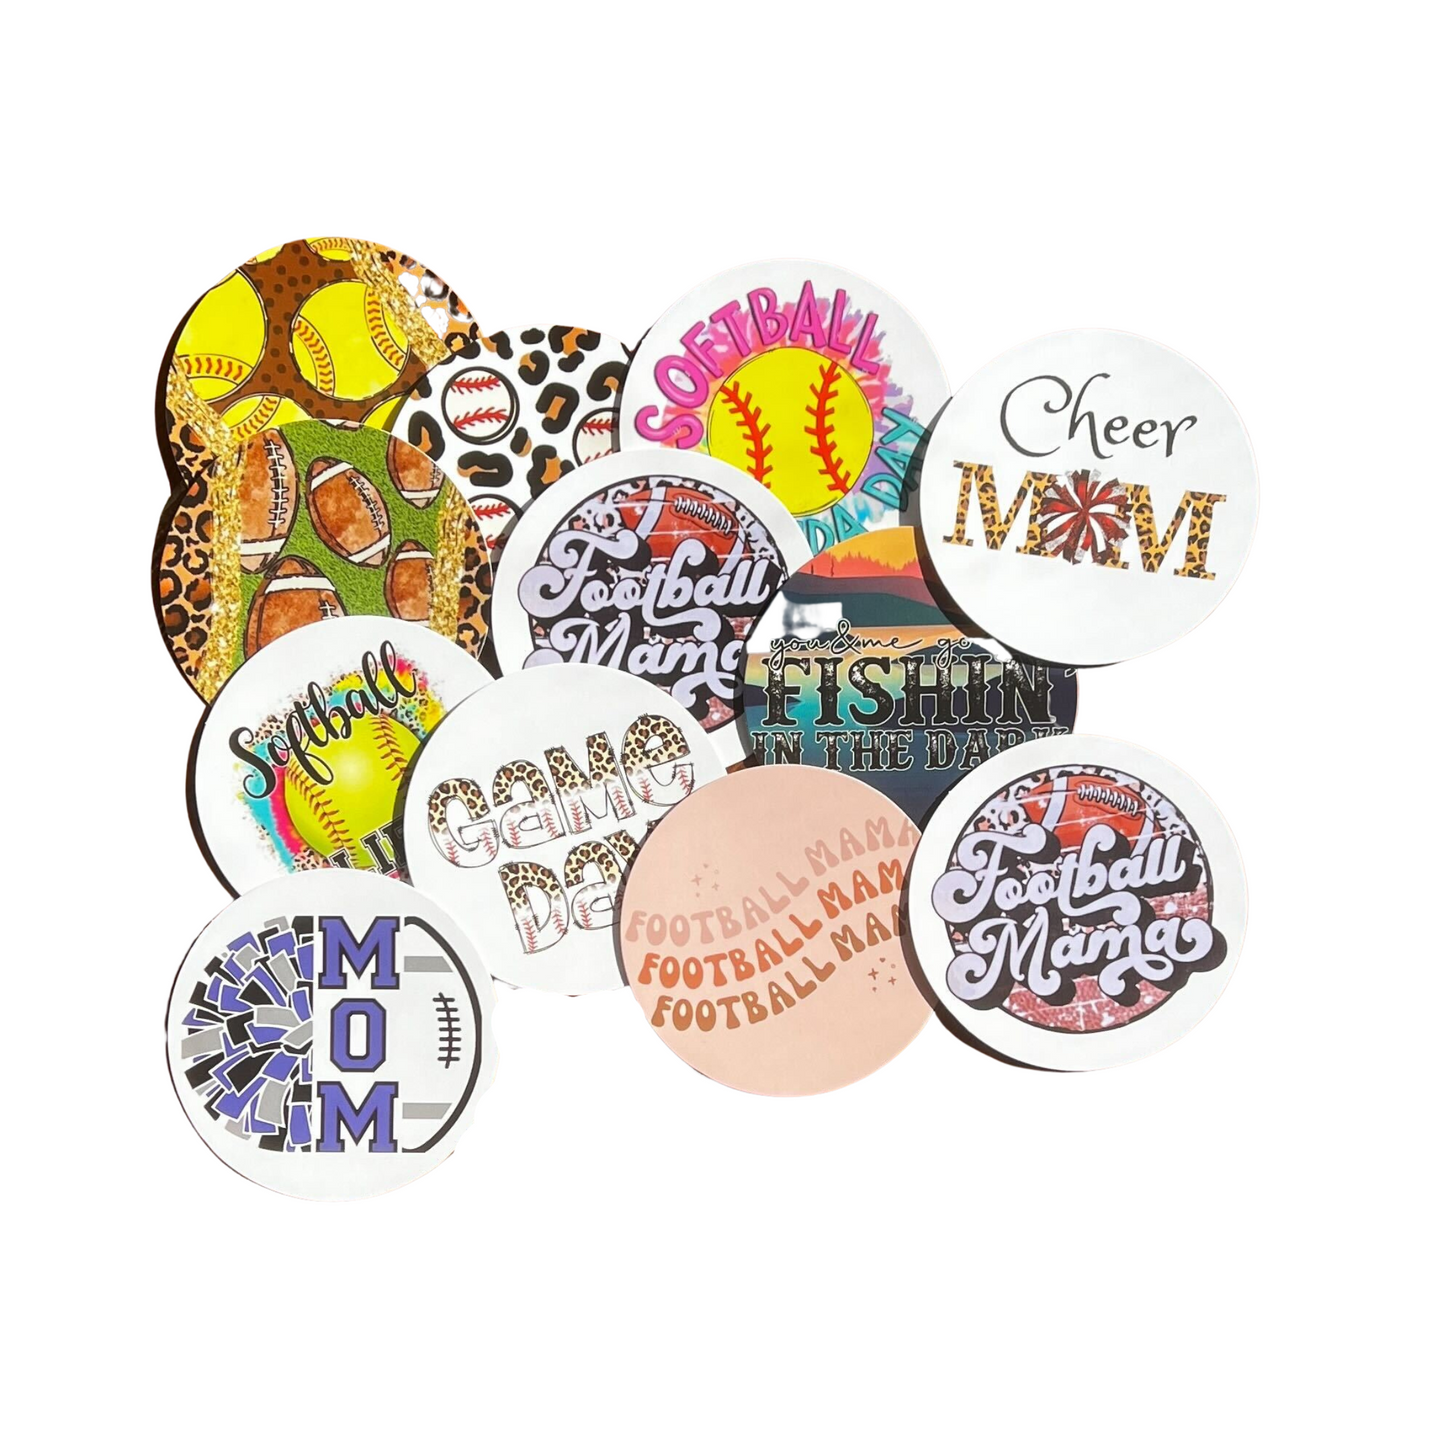 Freshie Sports Cardstock Cutouts Rounds 2.5” inch for Freshies Random Mix | 12 pk | For Scented Aroma Beads Bake with Mold for Car Freshie Designs, Softball, Baseball, Football, Pom and Cheer, Fishing